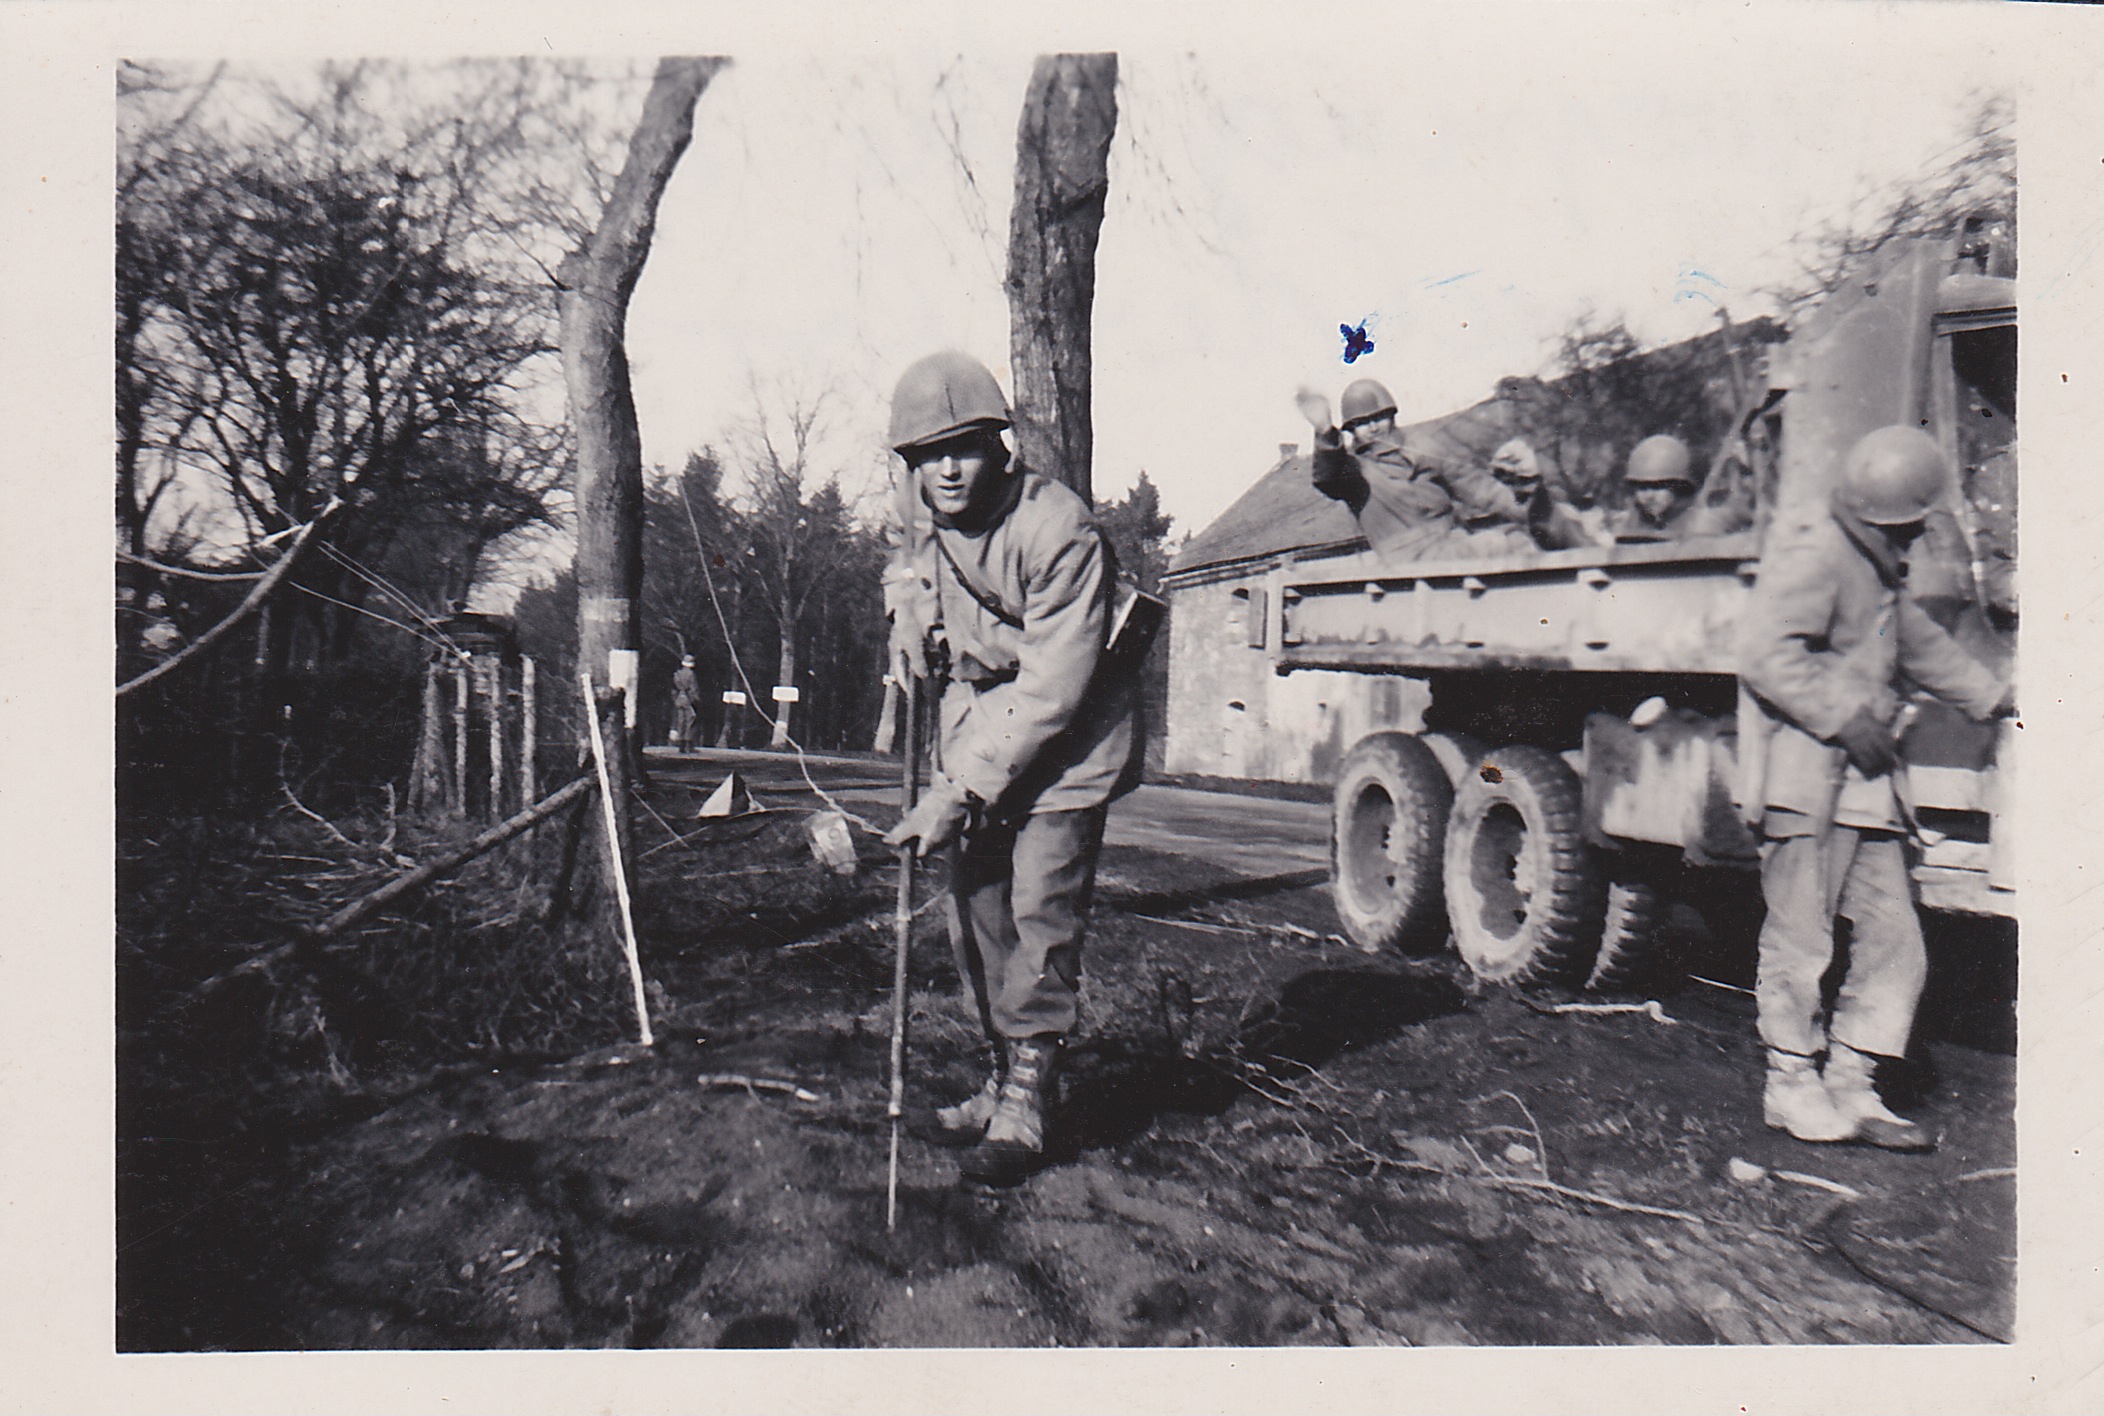 Sweeping shoulder of road for mines - 1945